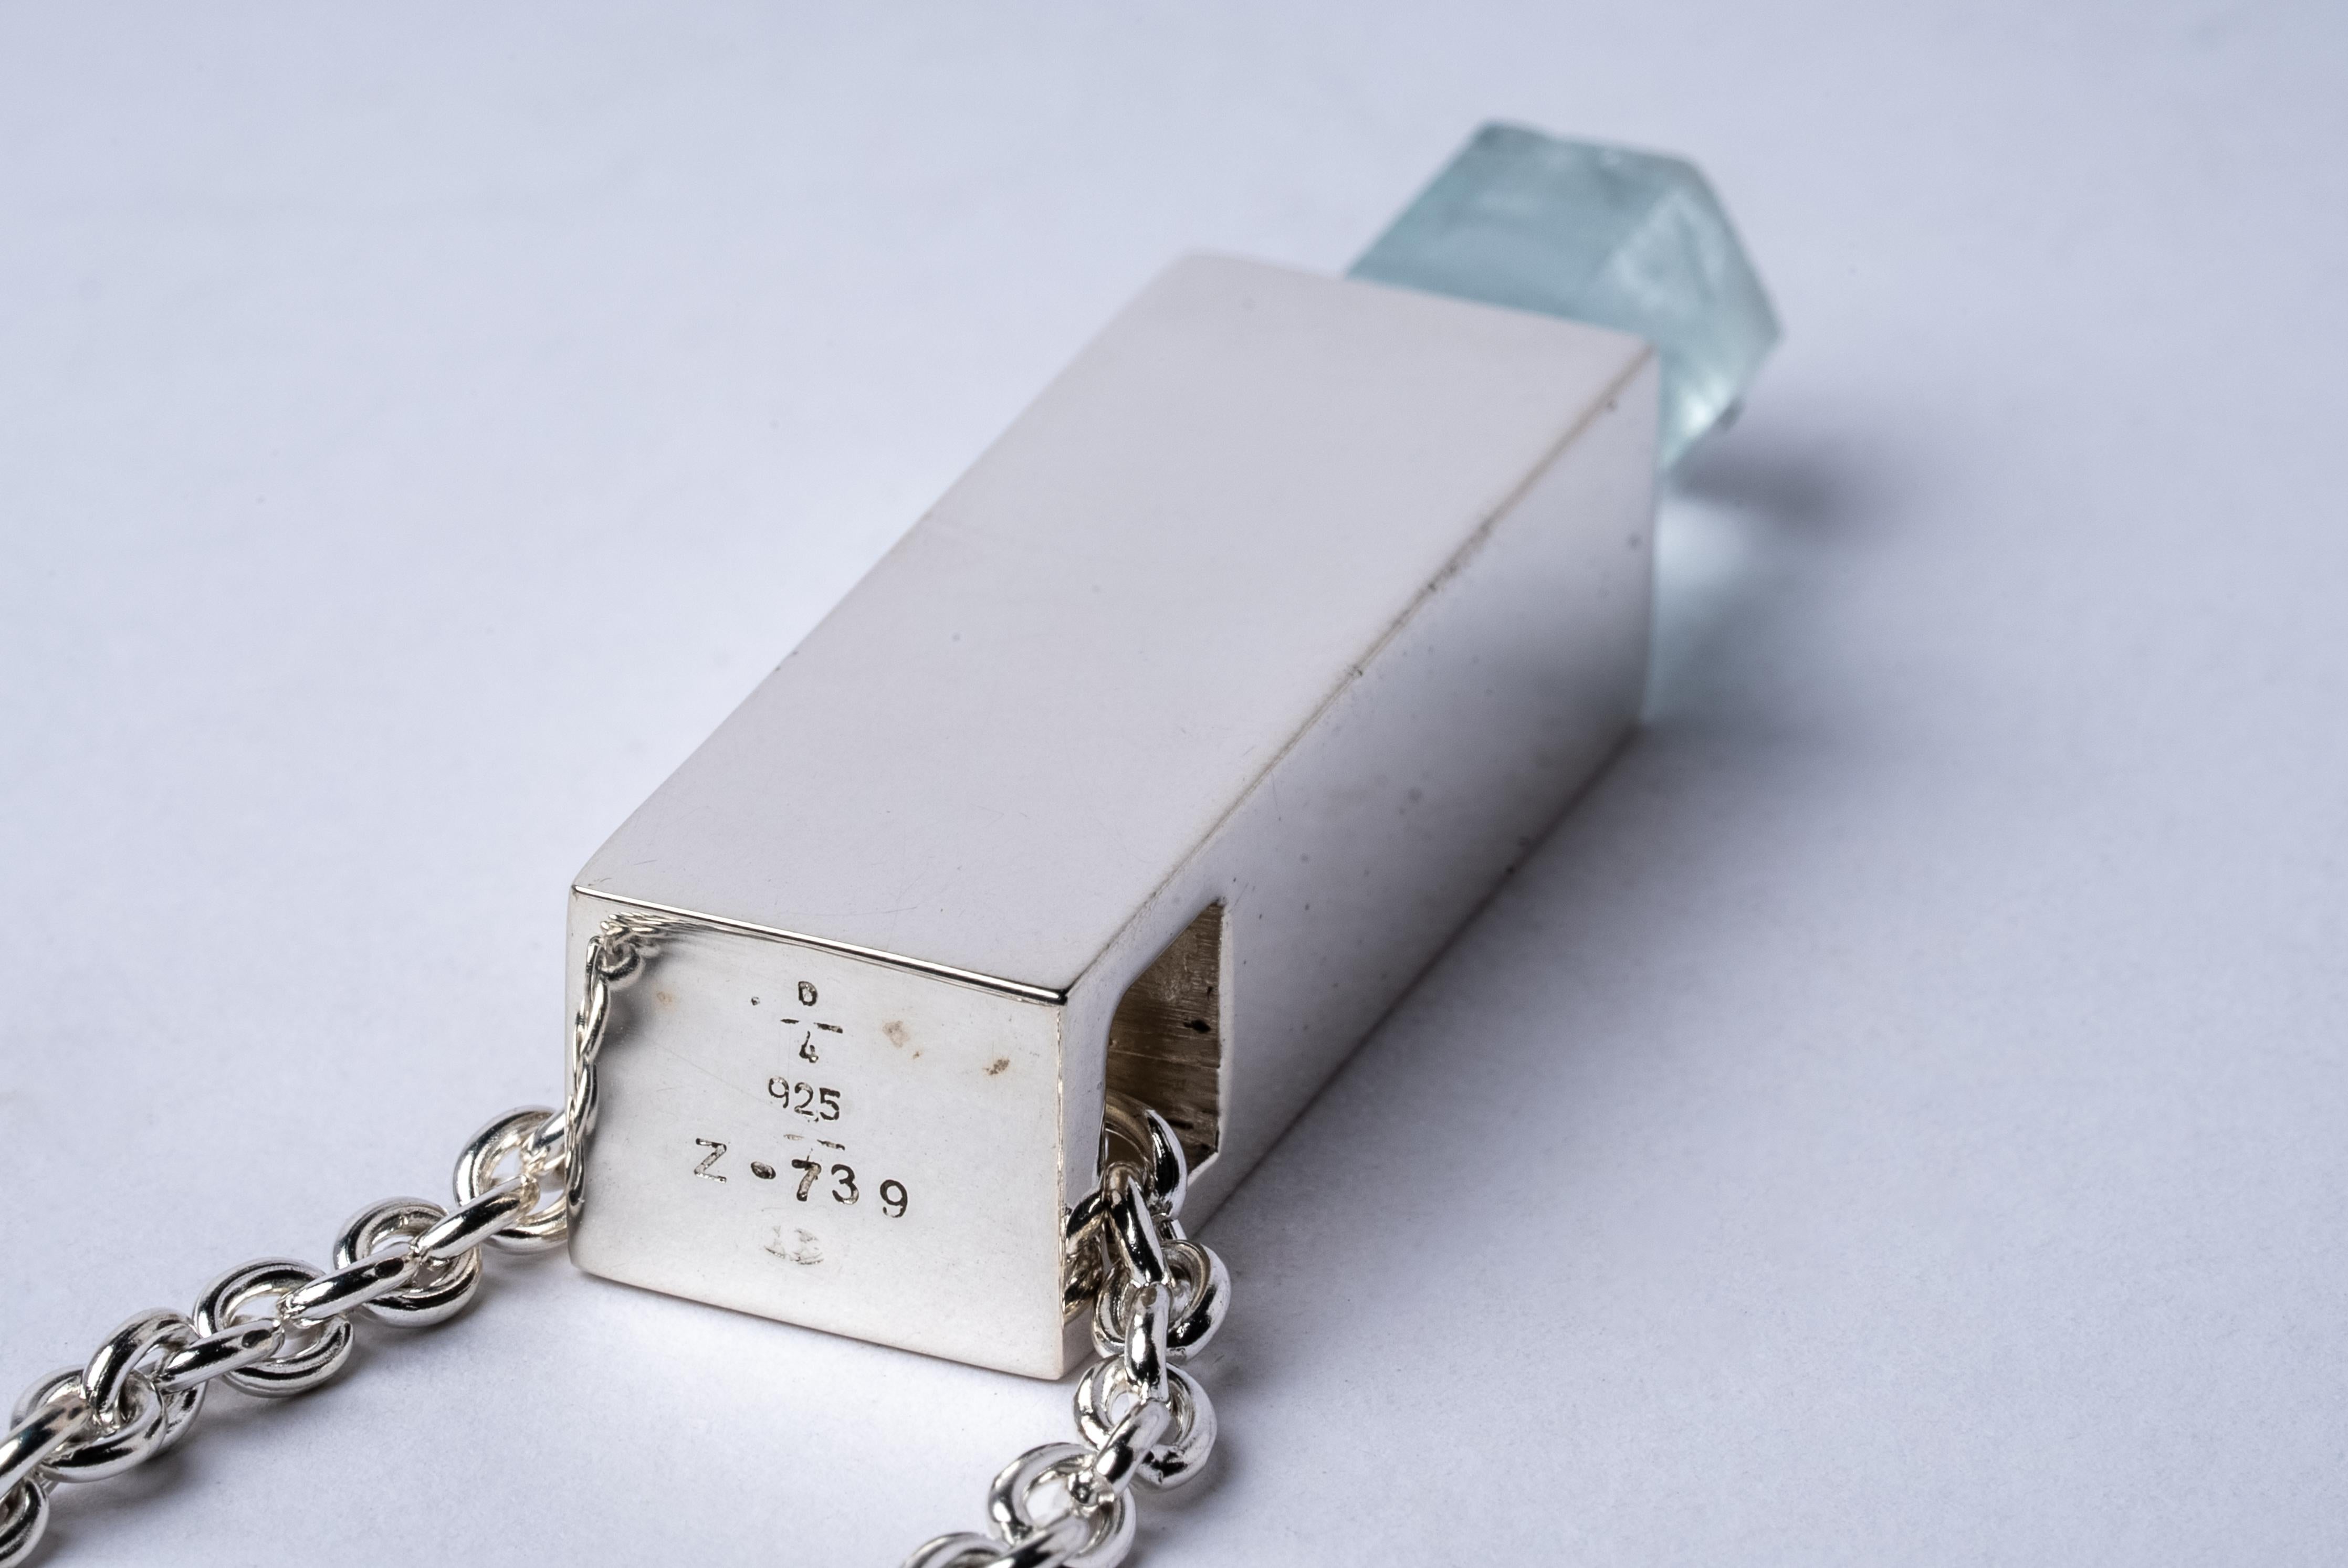 Necklace in the cuboid shape made in polished sterling silver and a rough of aquamarine. The Talisman series is an exploration into the power of natural crystals. The crystals used in these pieces are discovered through adventure and are hand